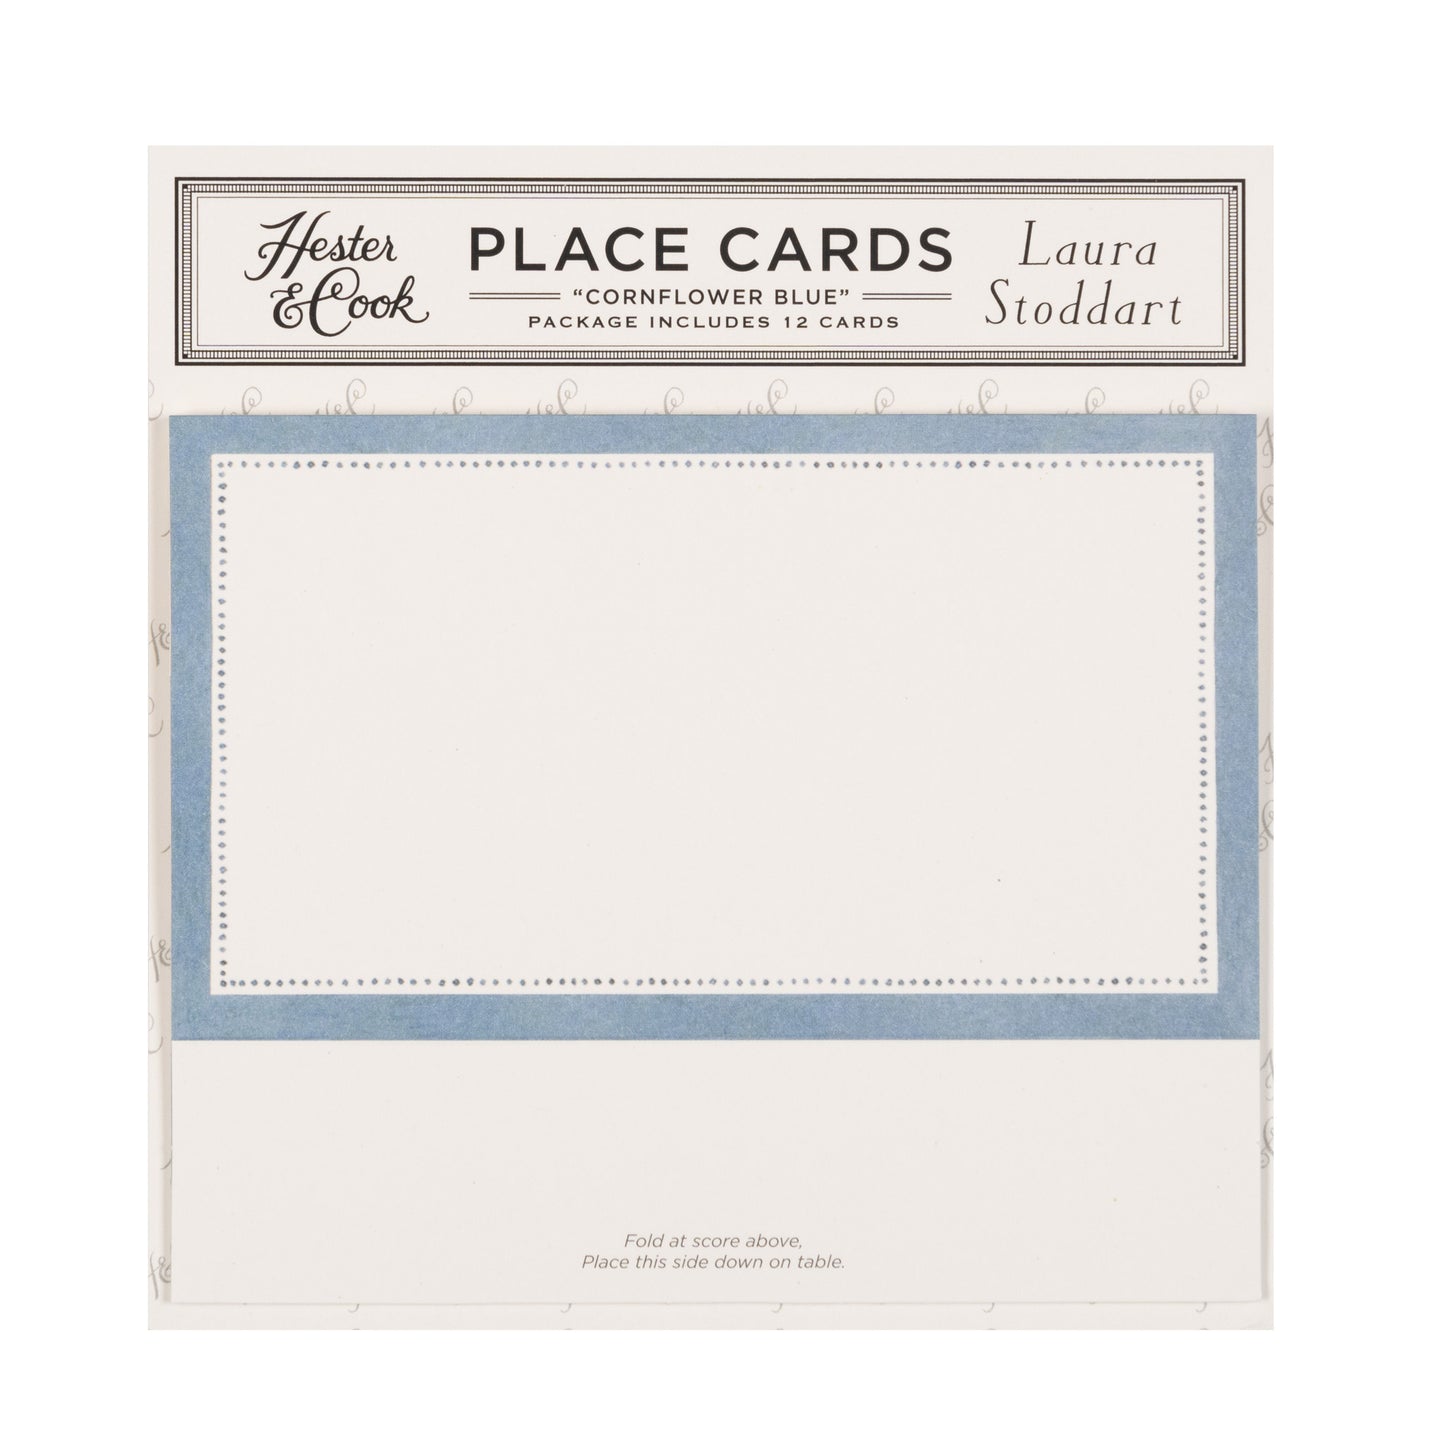 Tabletop - Tulips Blue Border Place Card